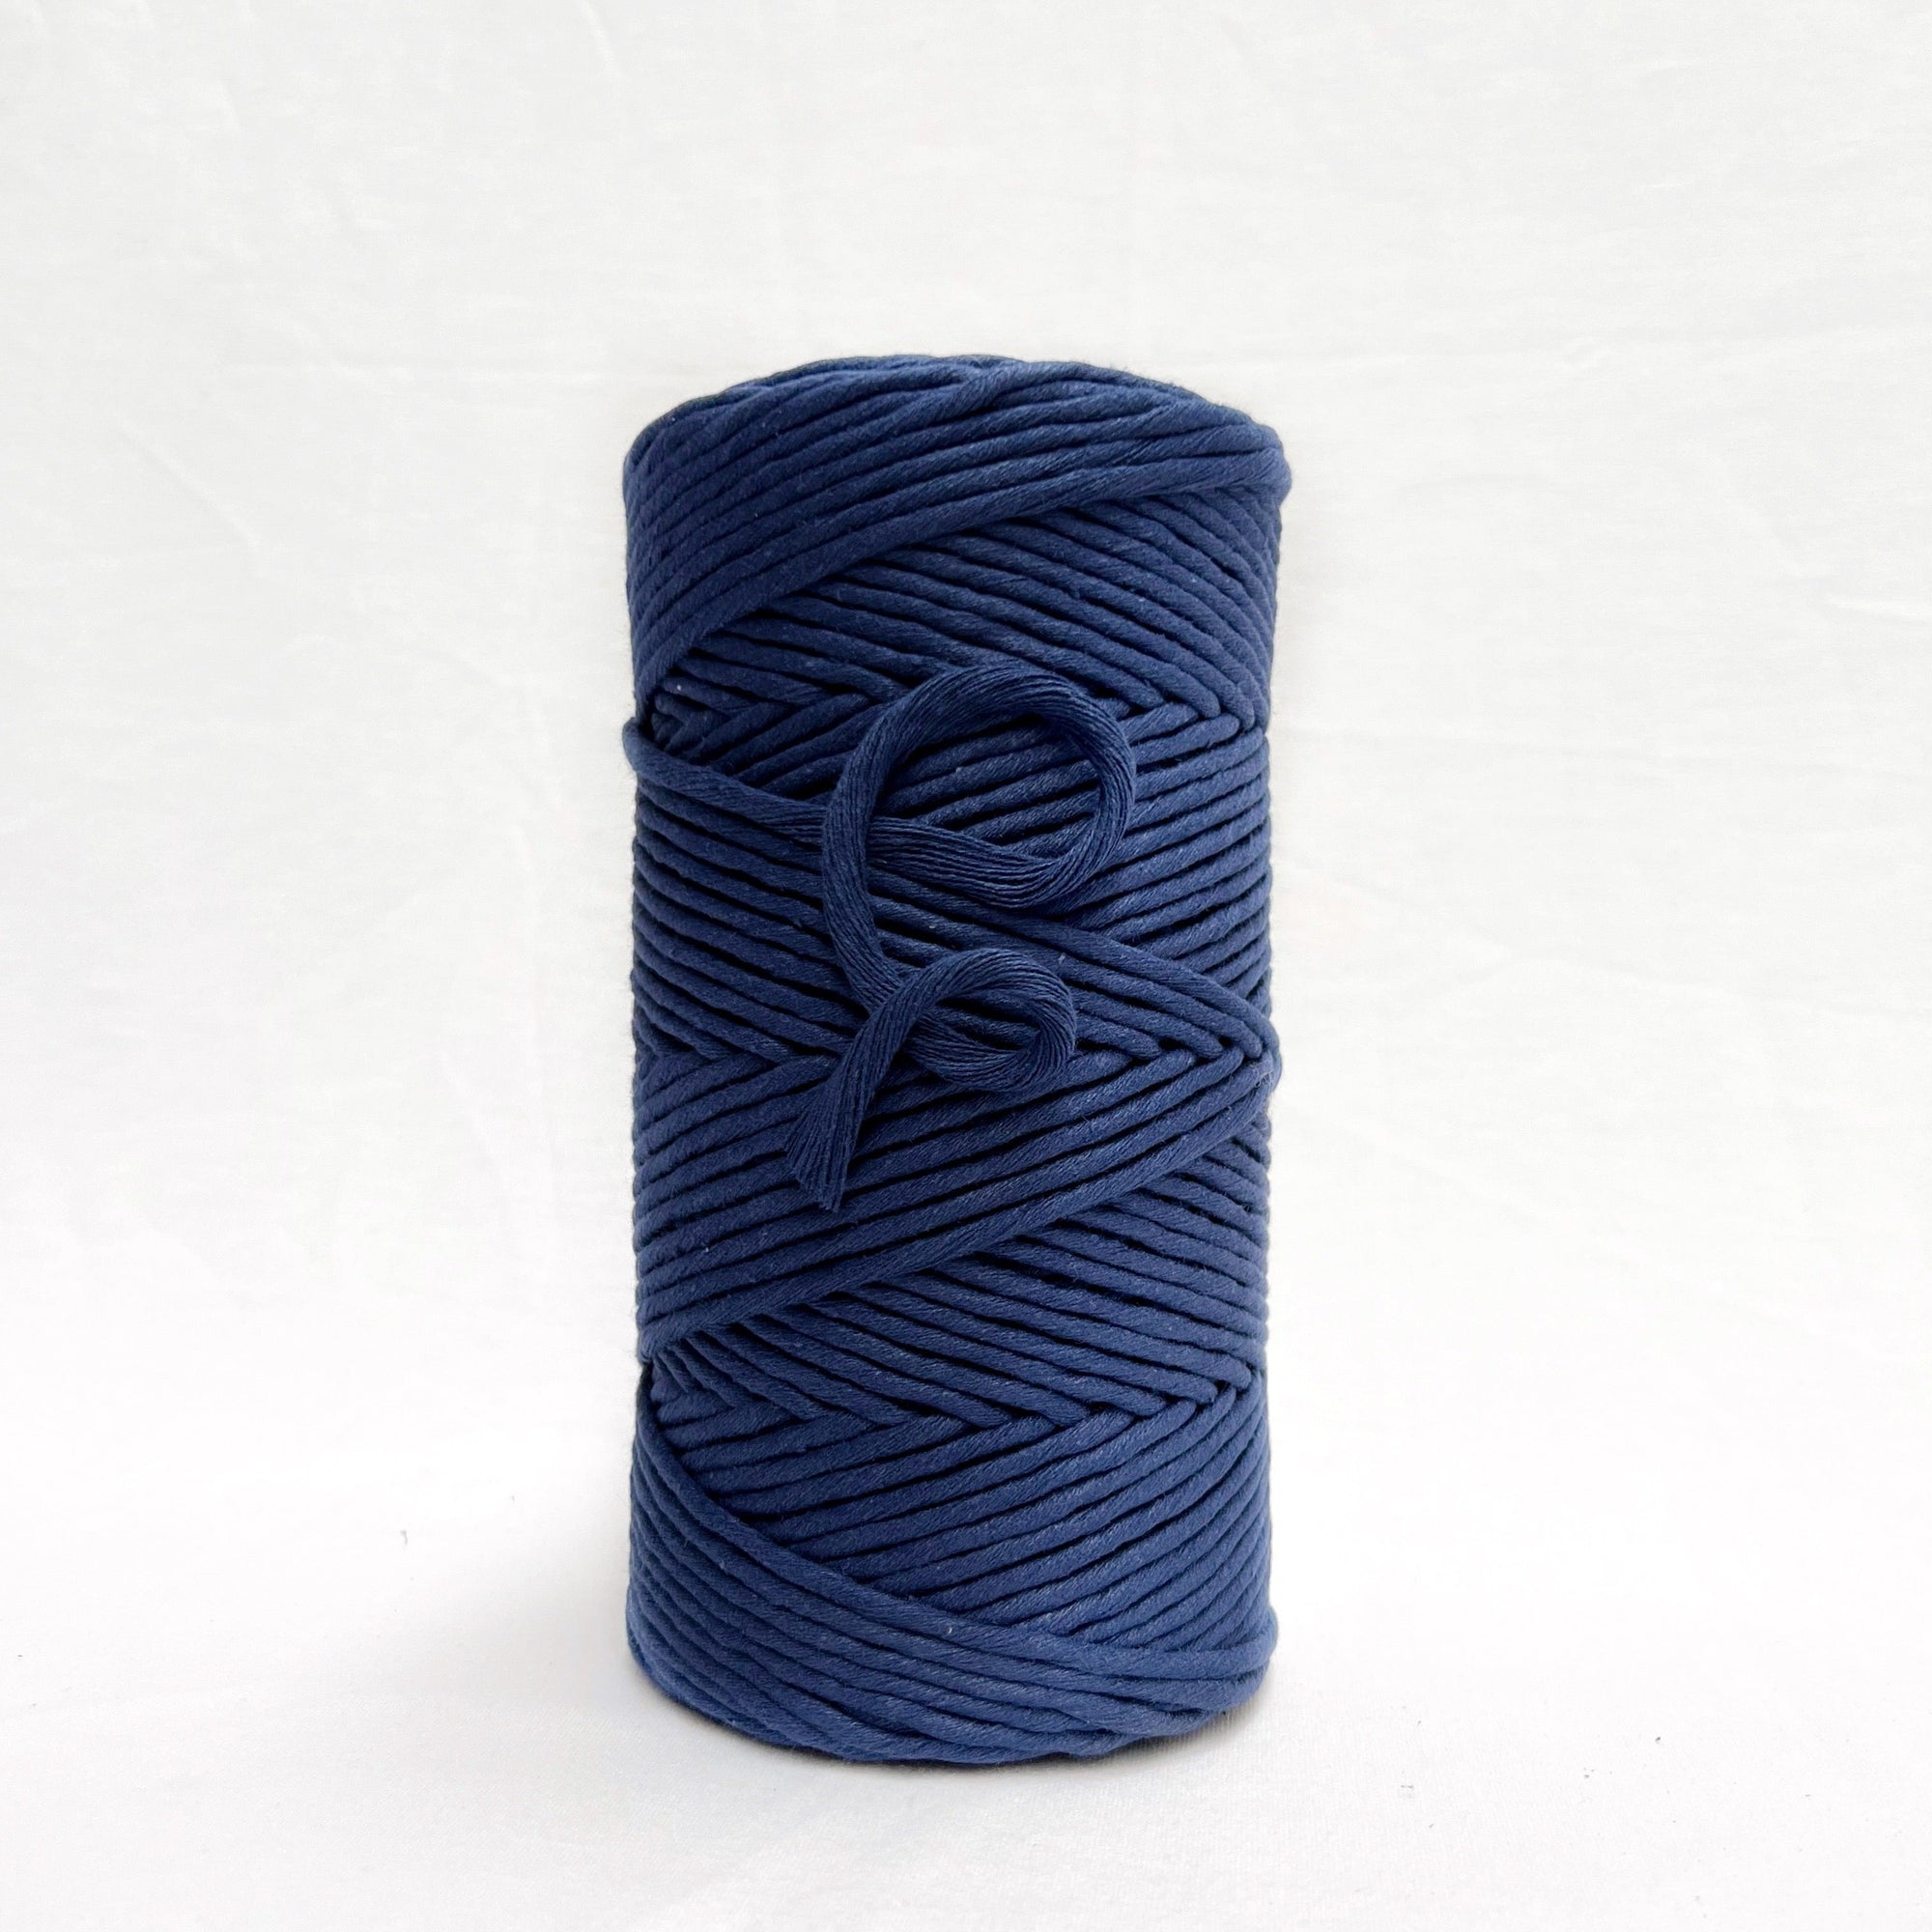 Mary Maker Studio 5mm 1kg Recycled Luxe Macrame String // Blue Depths macrame cotton macrame rope macrame workshop macrame patterns macrame